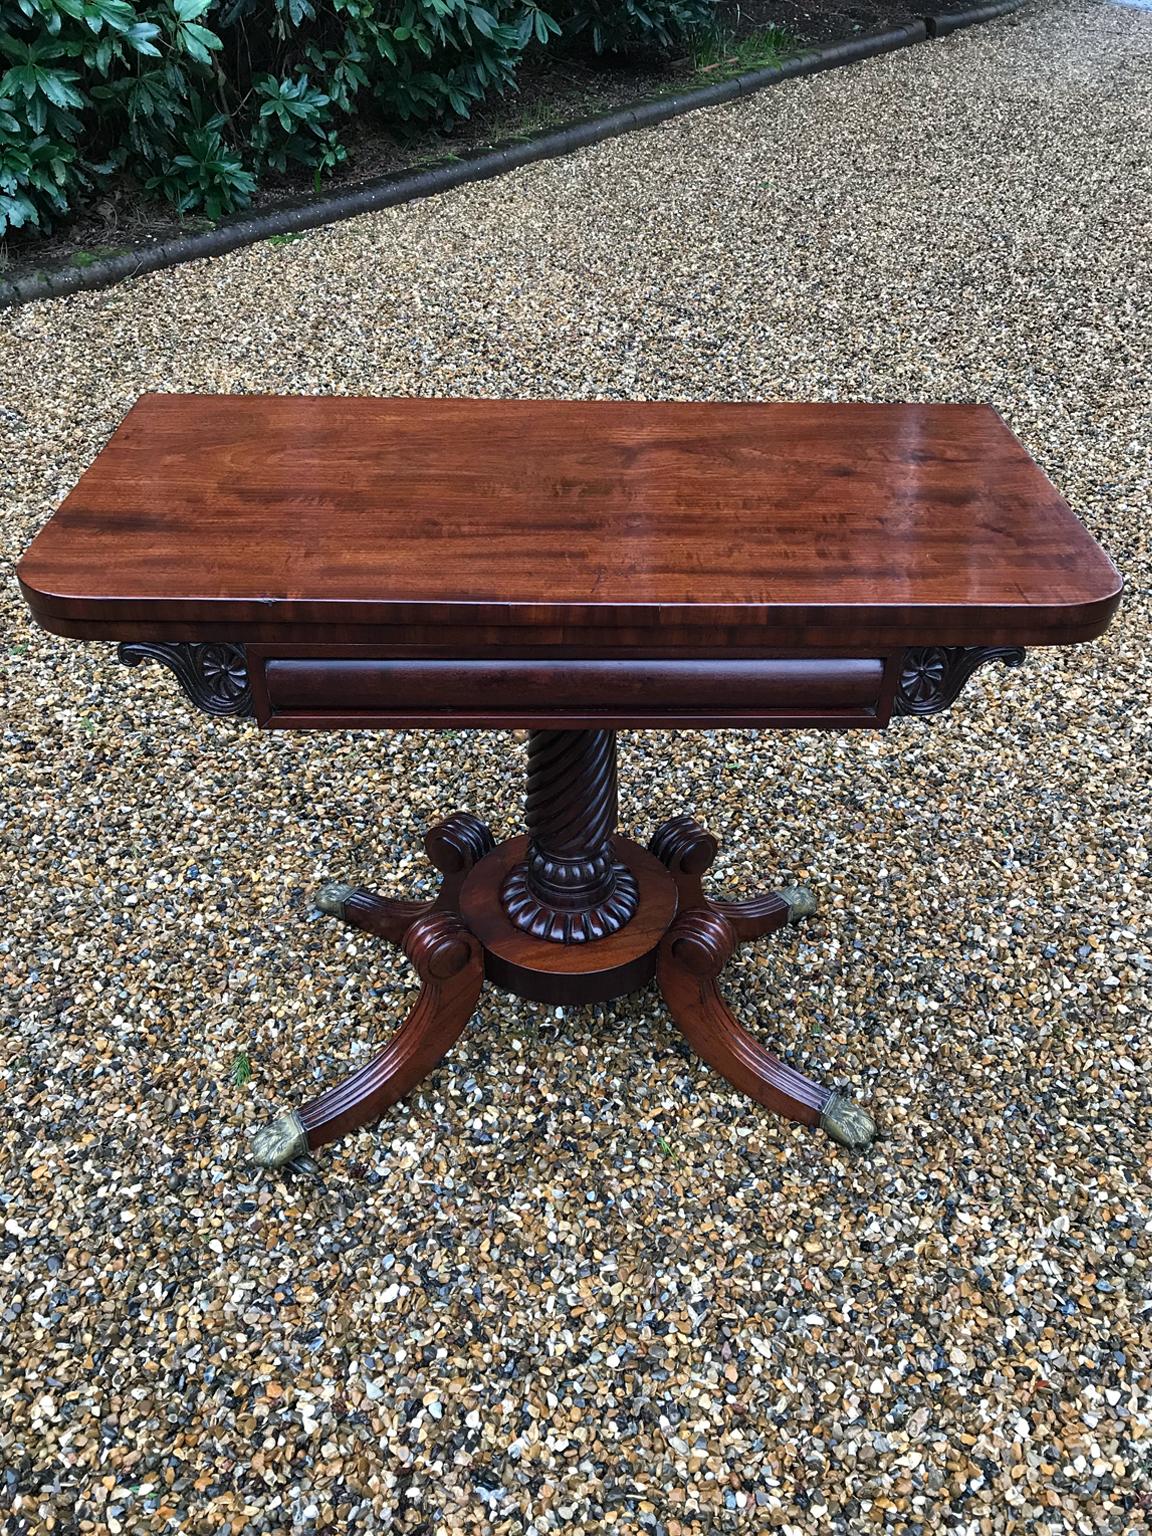 An original 19th century Regency mahogany card table with baize interior. The carved cylindrical central column which has four splayed feet on original brass claw castors. The top swivels open to become a card table,

circa